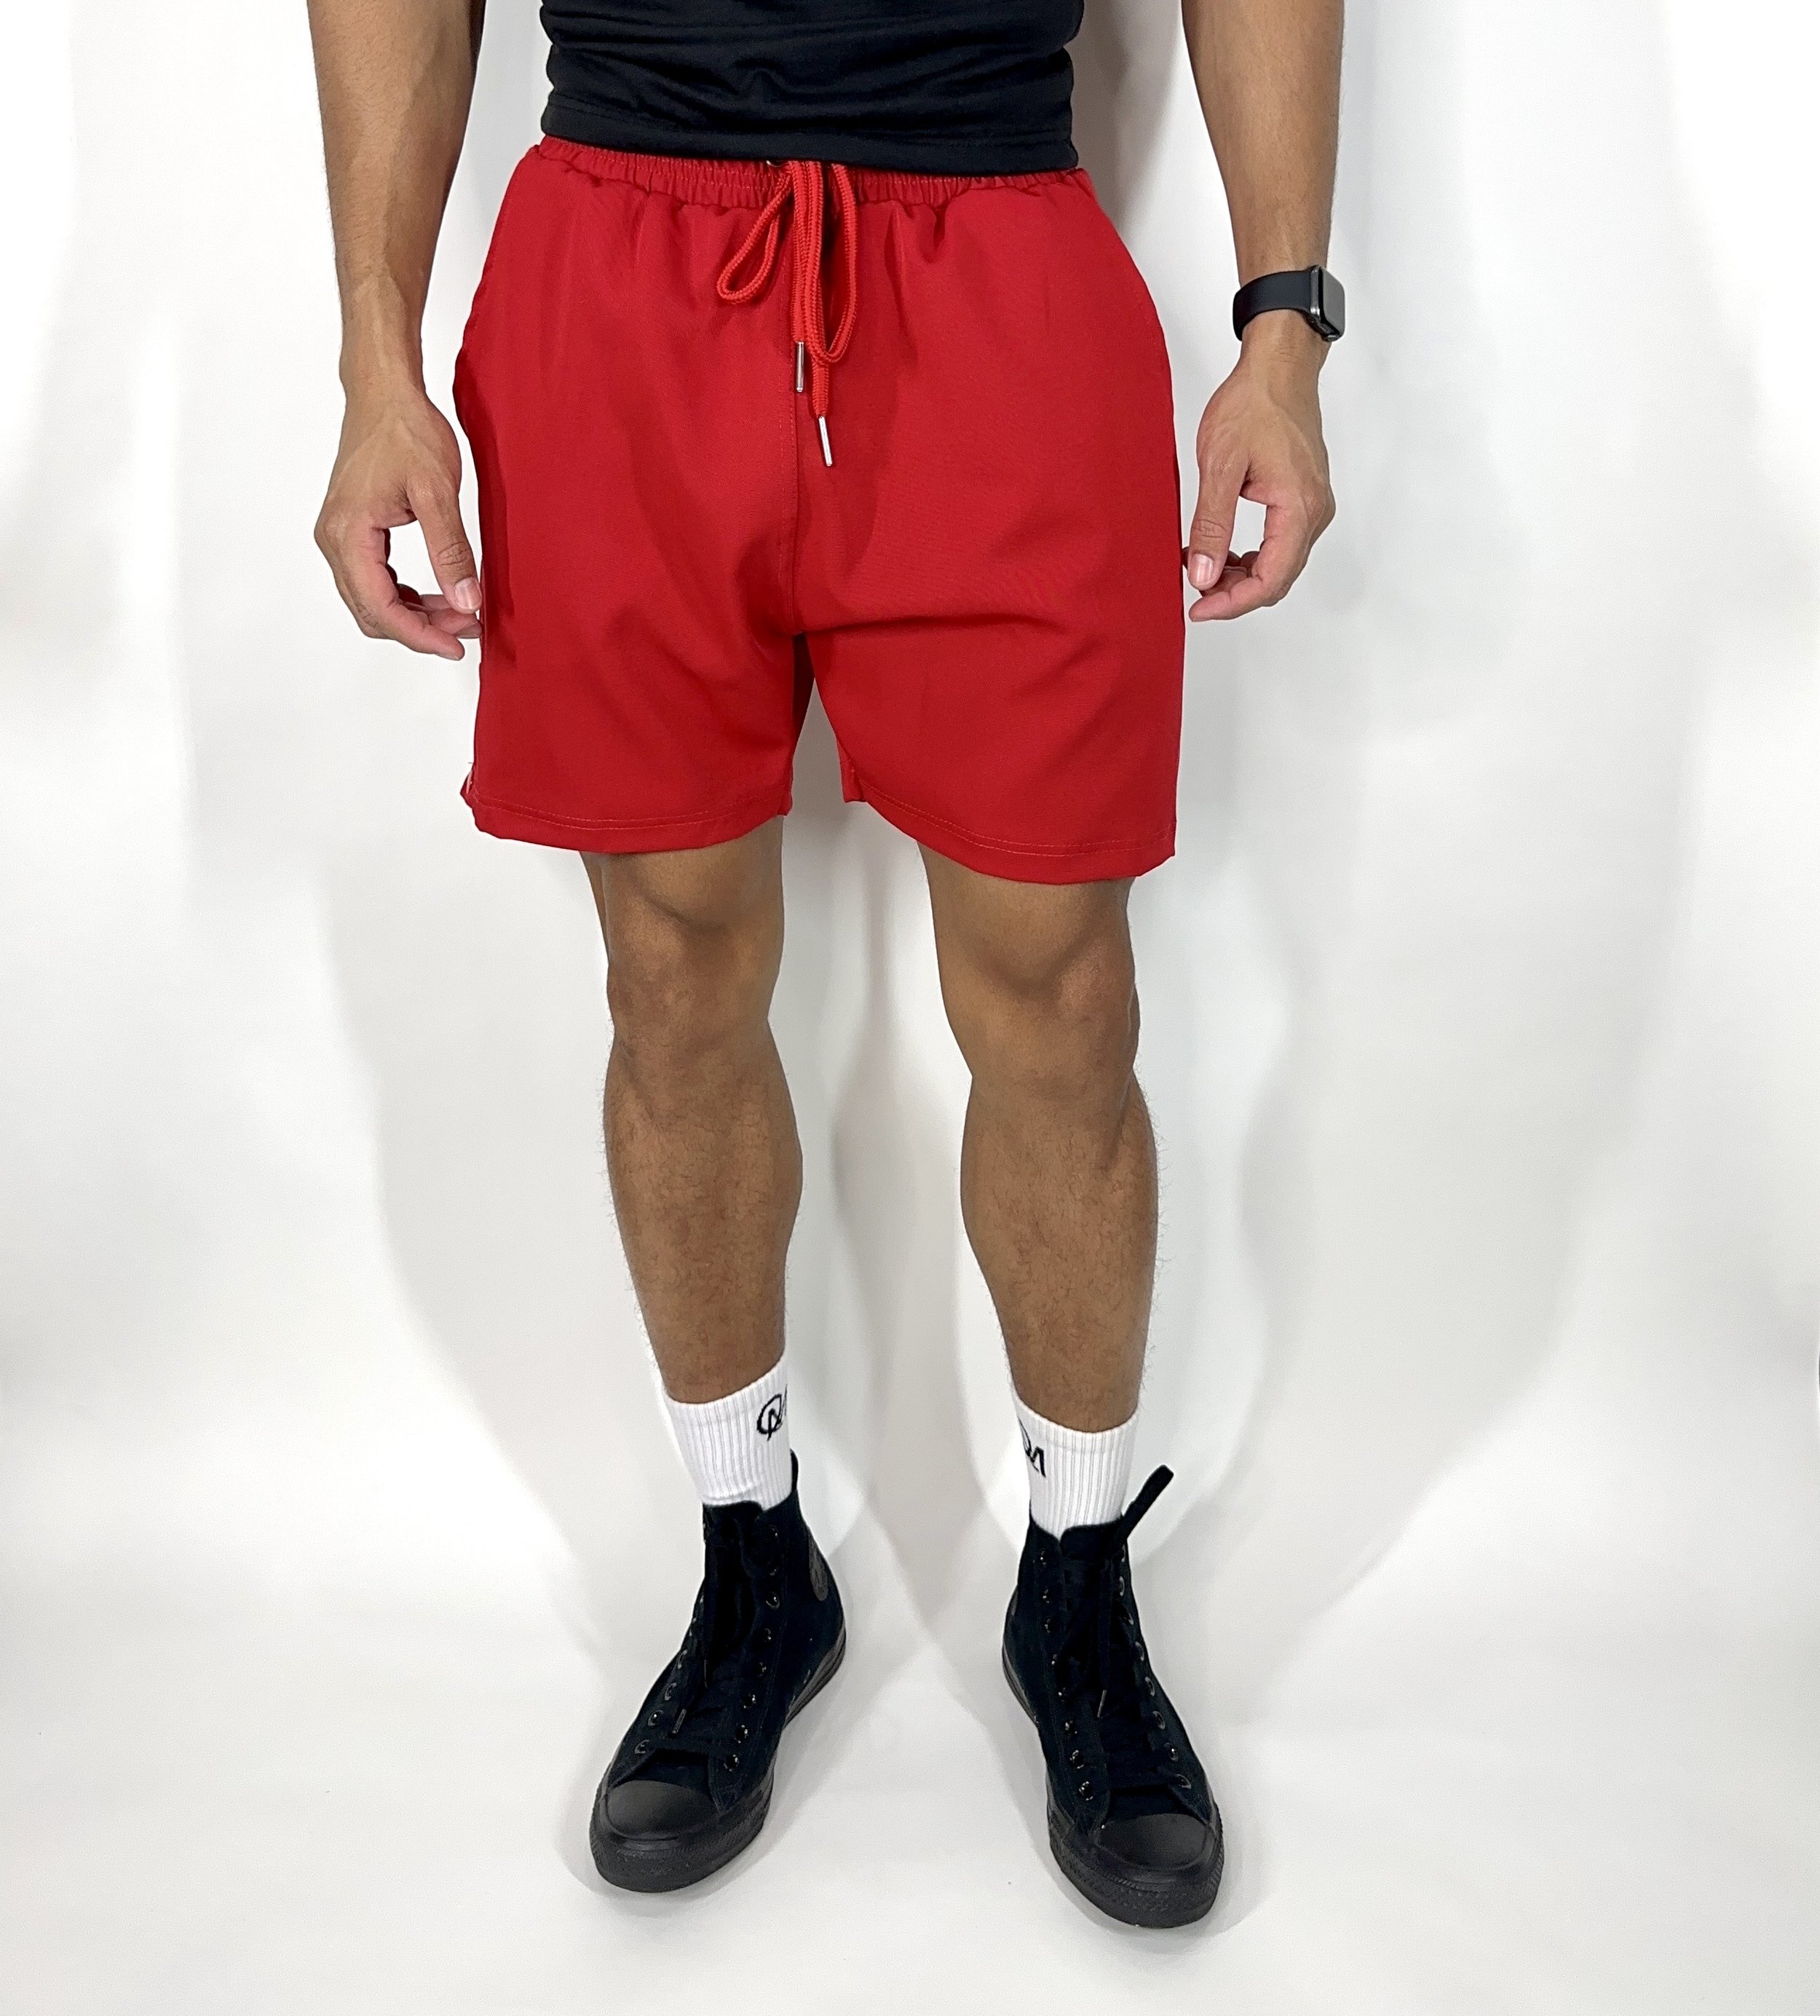 Bball Mesh Shorts — Quennell Mitchell